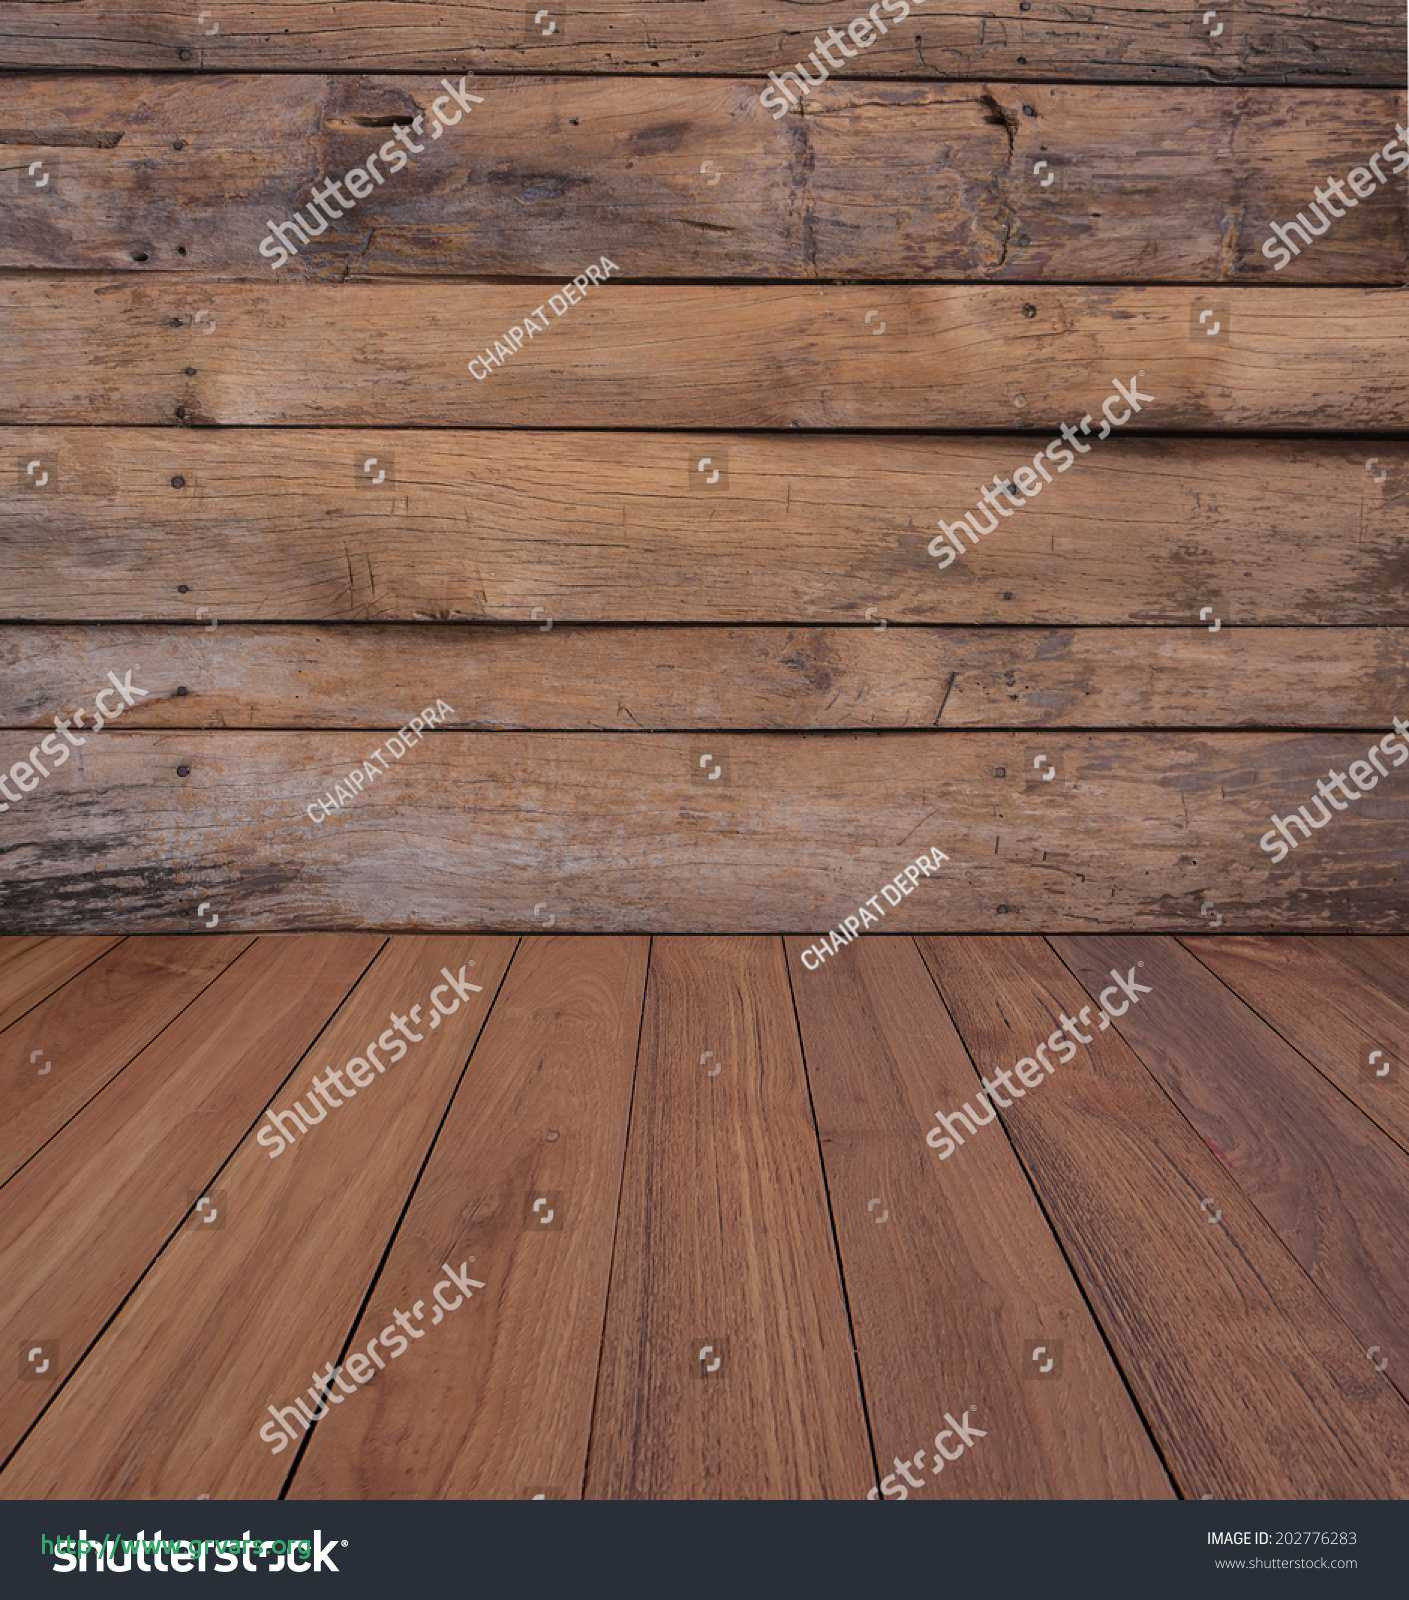 16 Fashionable Pictures Of Different Types Of Hardwood Floors 2024 free download pictures of different types of hardwood floors of 18 beau what type of hardwood floor do i have ideas blog regarding od wood wall and wood floor